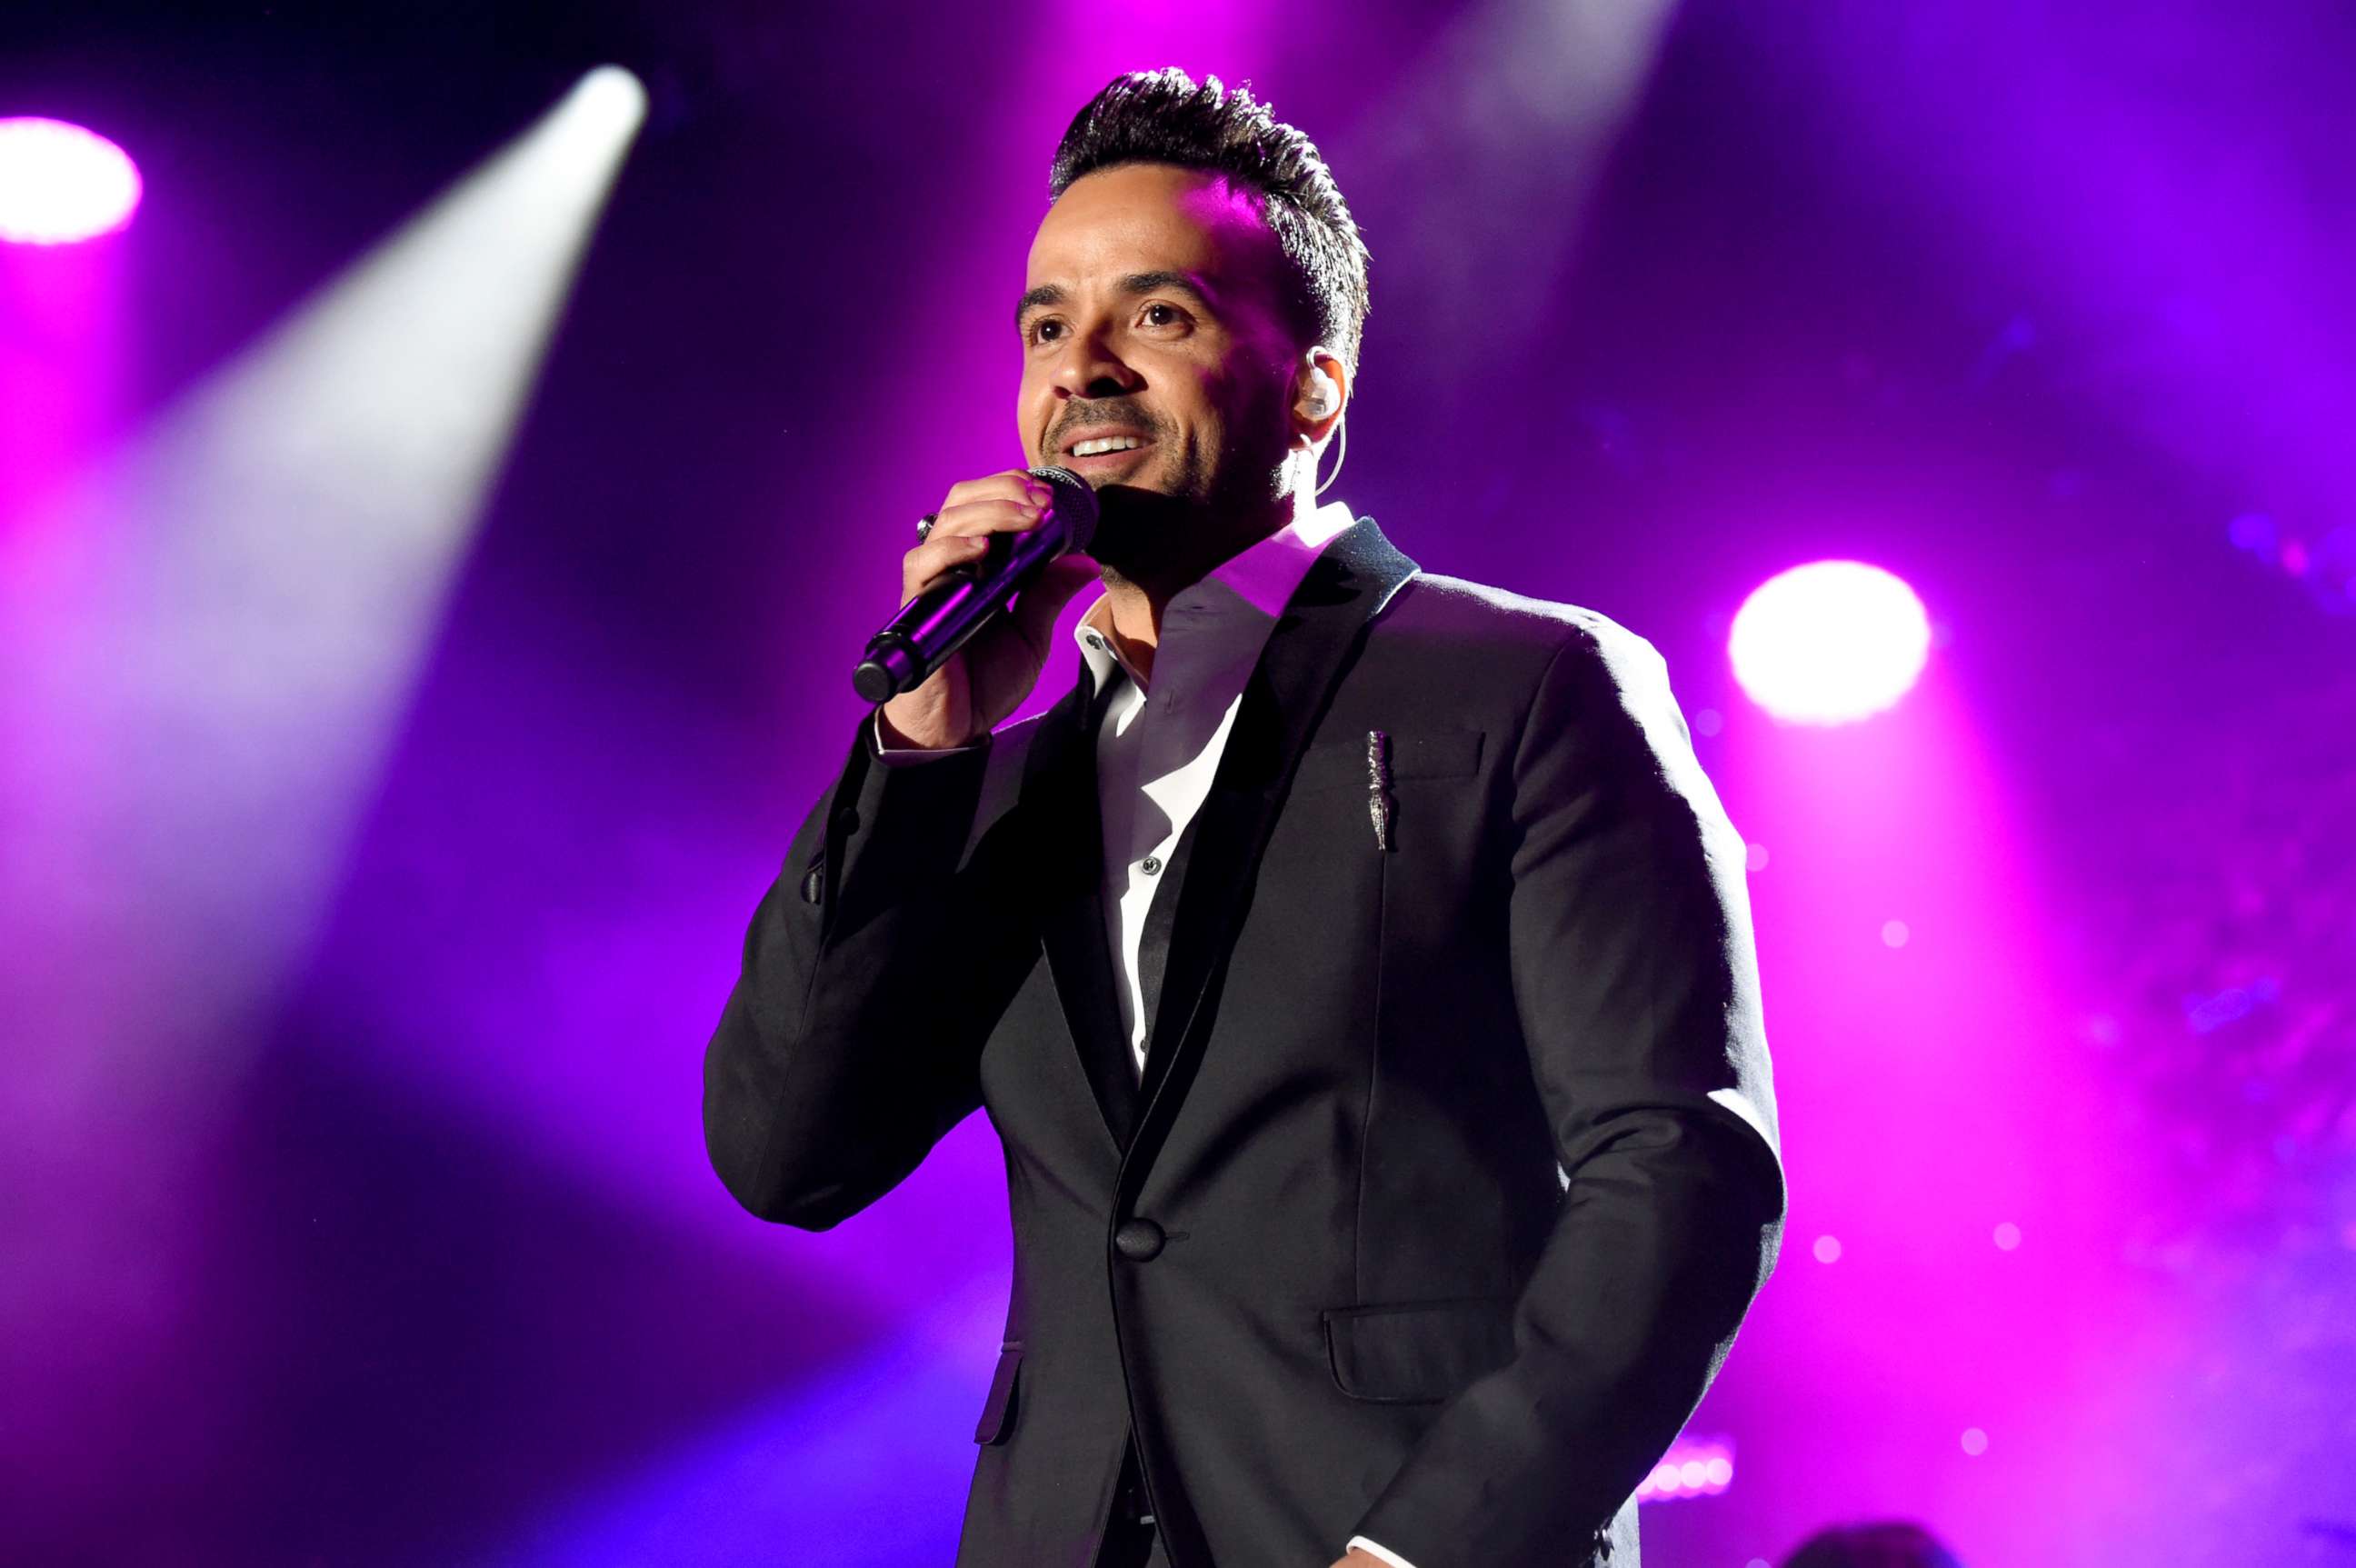 PHOTO: Luis Fonsi performs onstage during  the Clive Davis and Recording Academy Pre-GRAMMY Gala and GRAMMY Salute to Industry Icons Honoring Jay-Z, Jan. 27, 2018 in New York City.